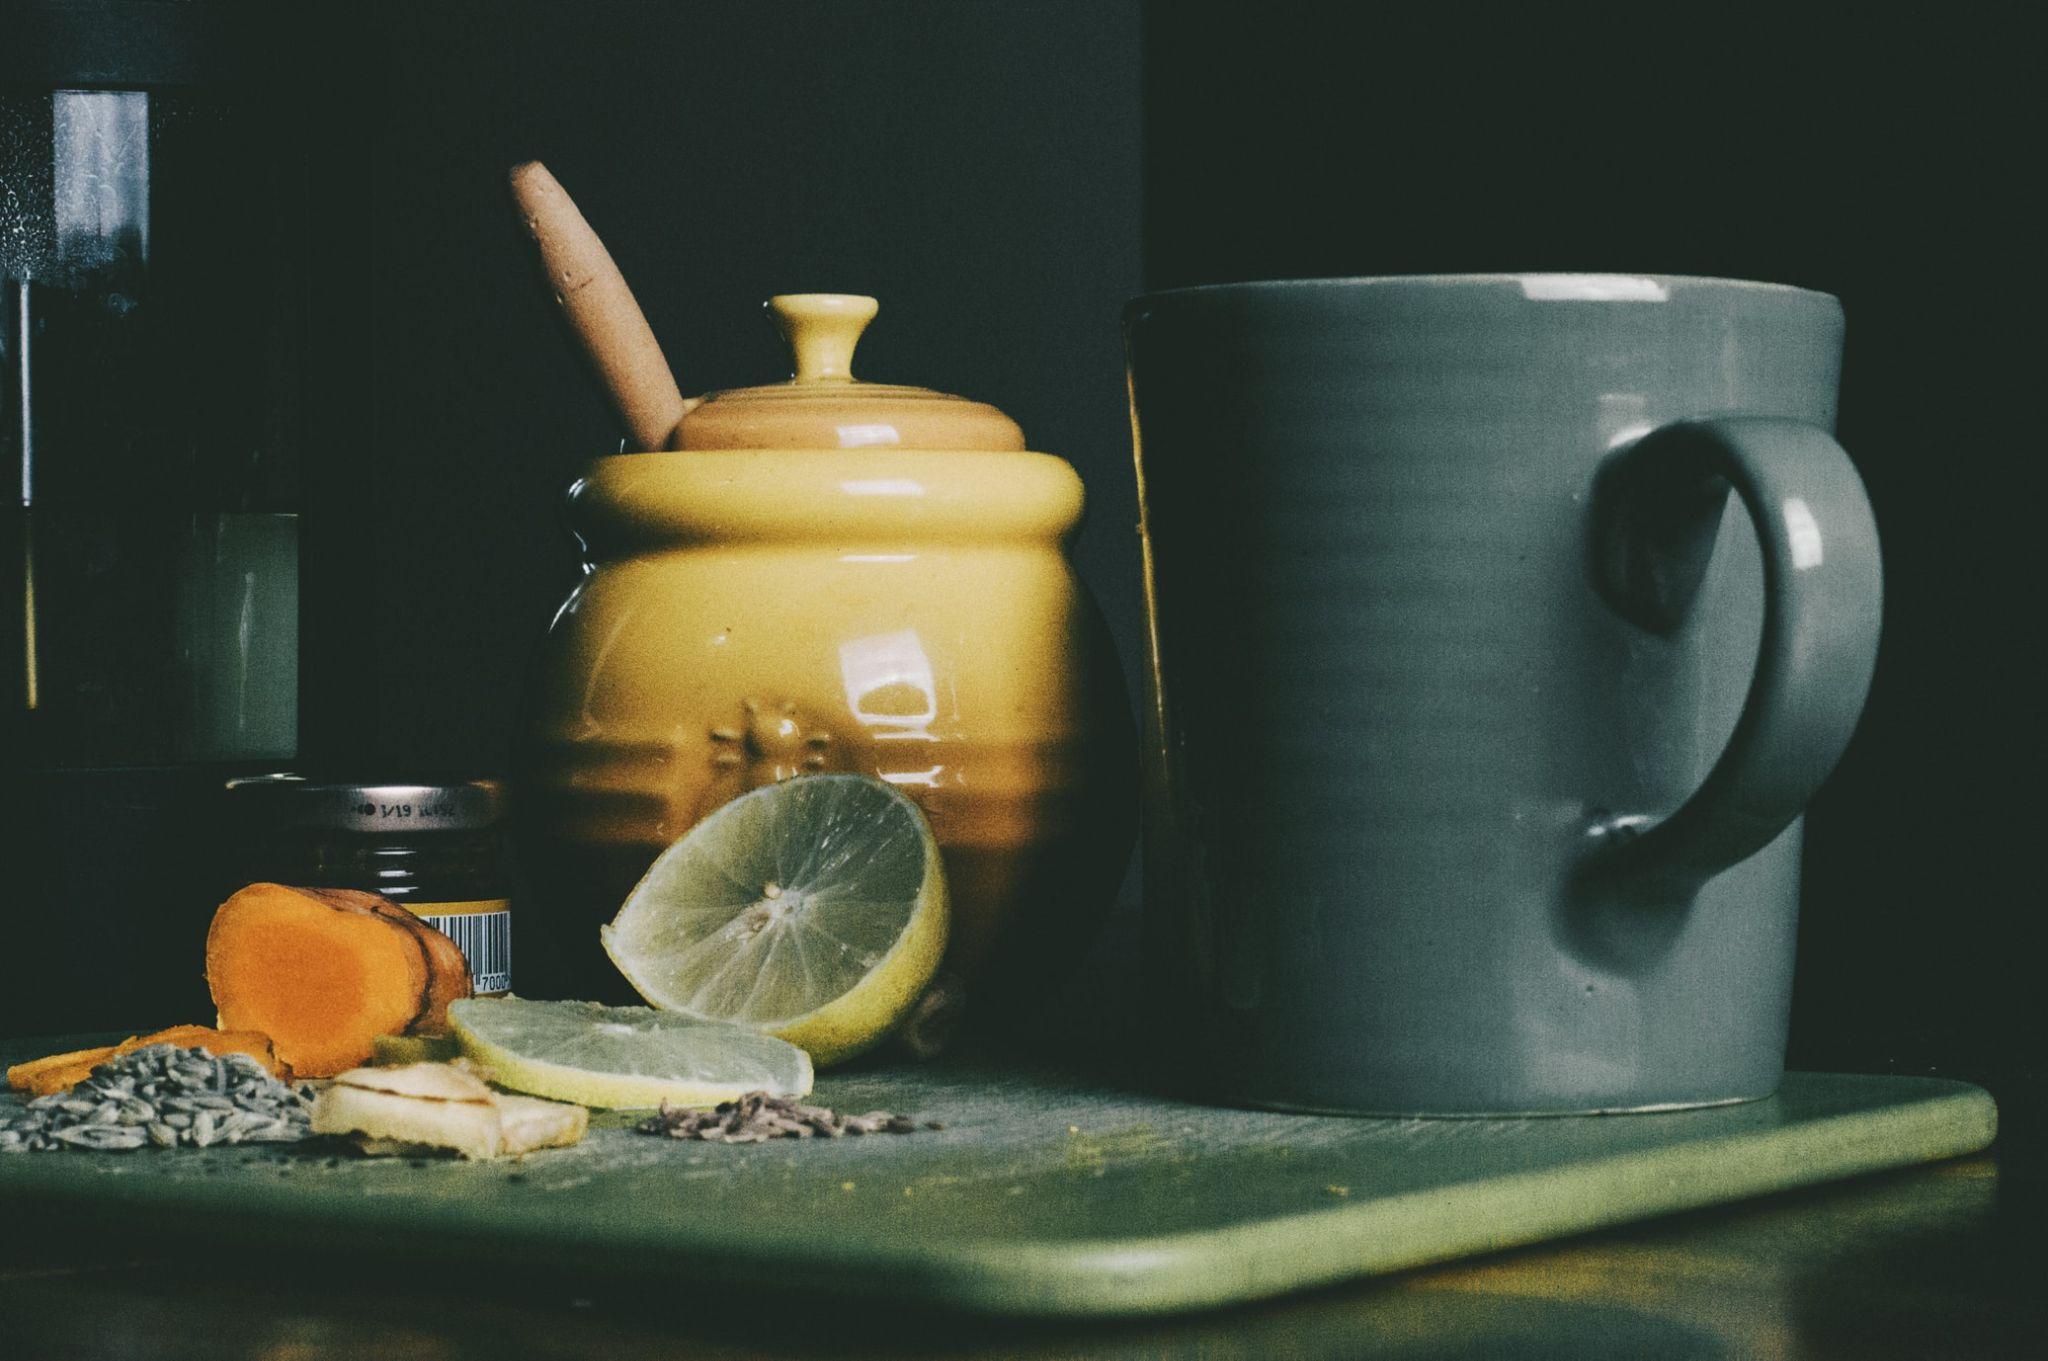 Natural home remedies for your cough, colds, and flu